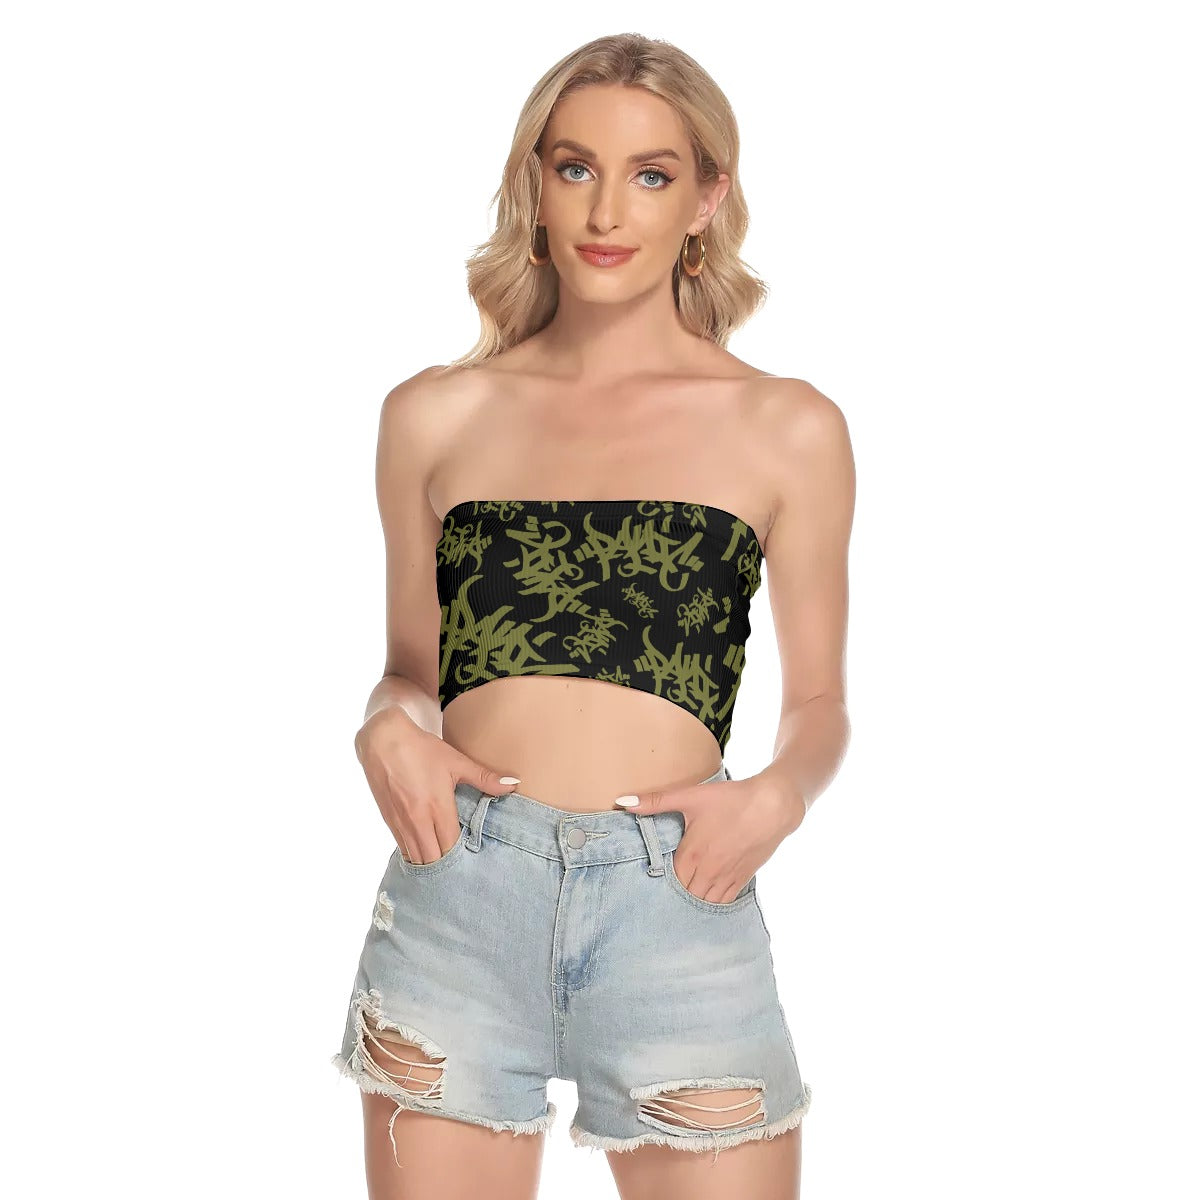 THE TAG TUBE TOP IN BLACK/OLIVE - Panic 39